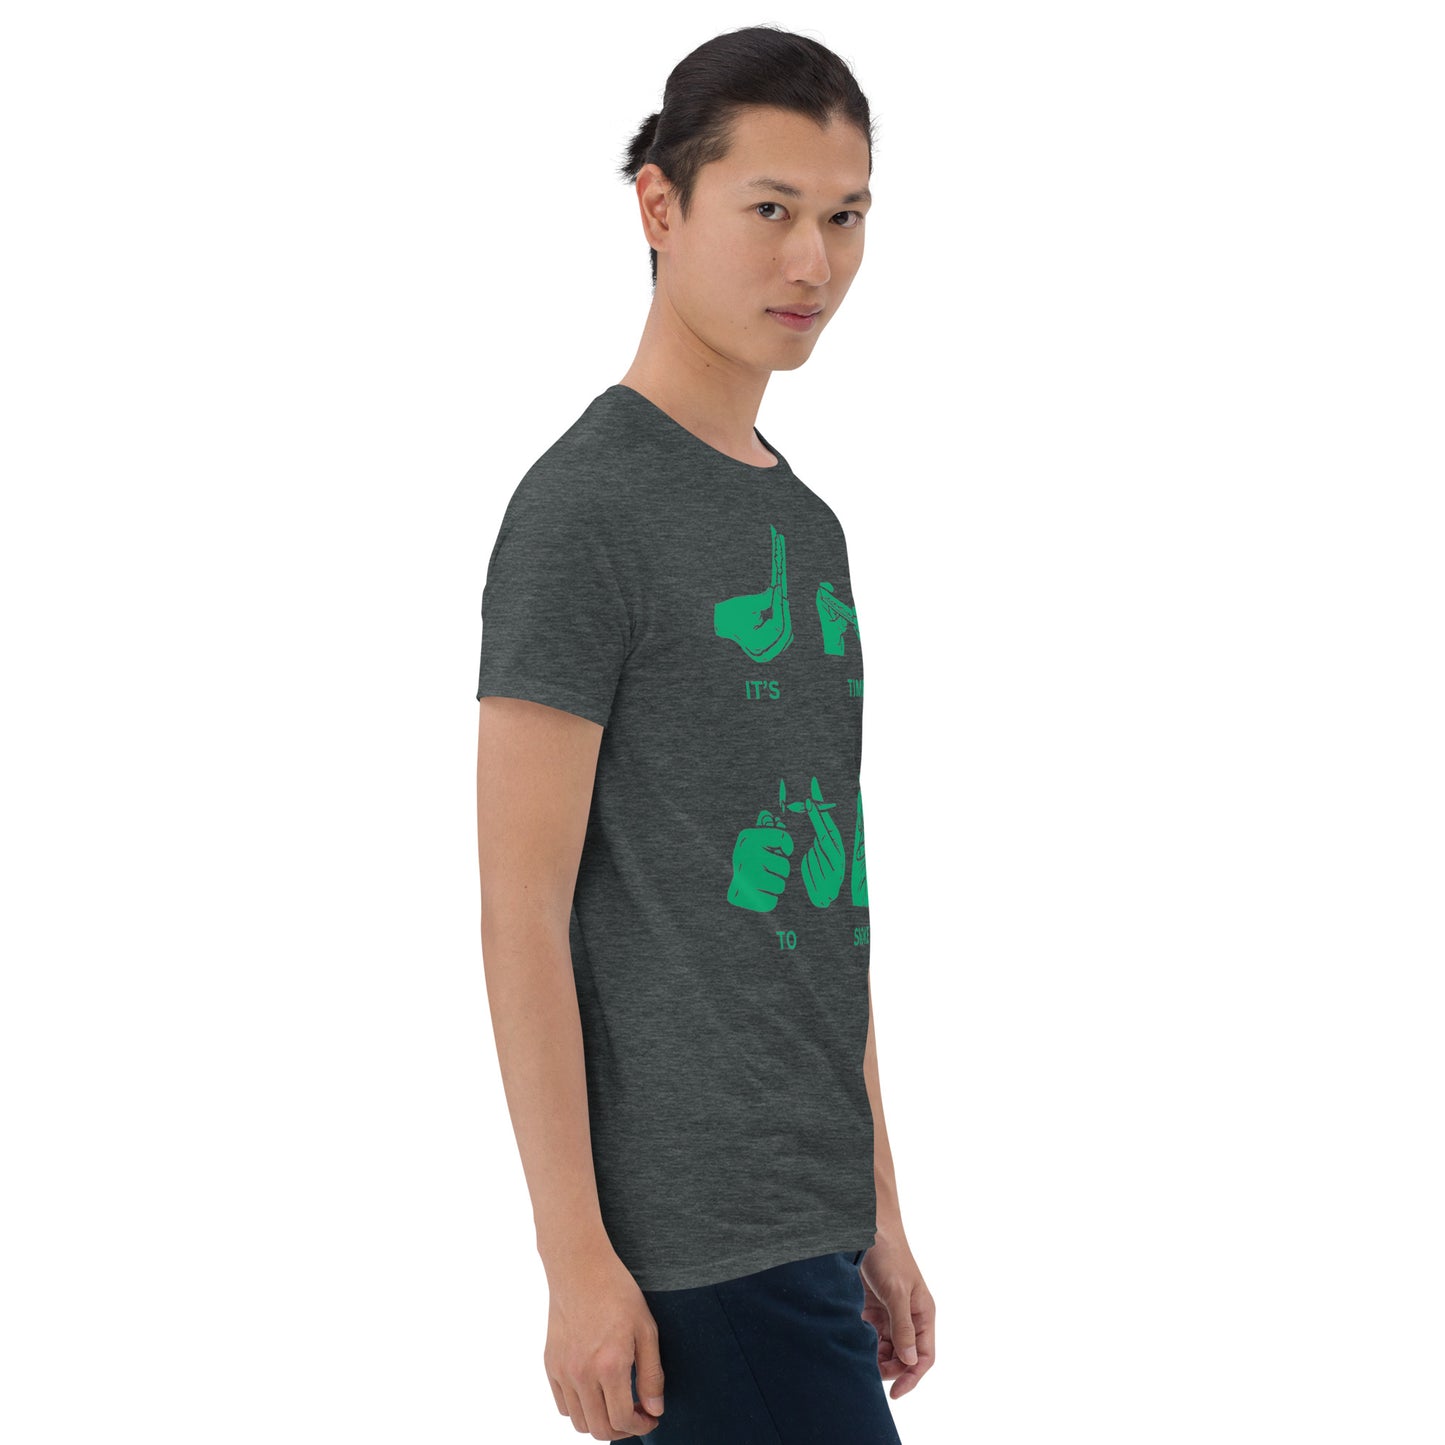 Short-Sleeve Unisex T-Shirt It's about that time solid green (Loud print)